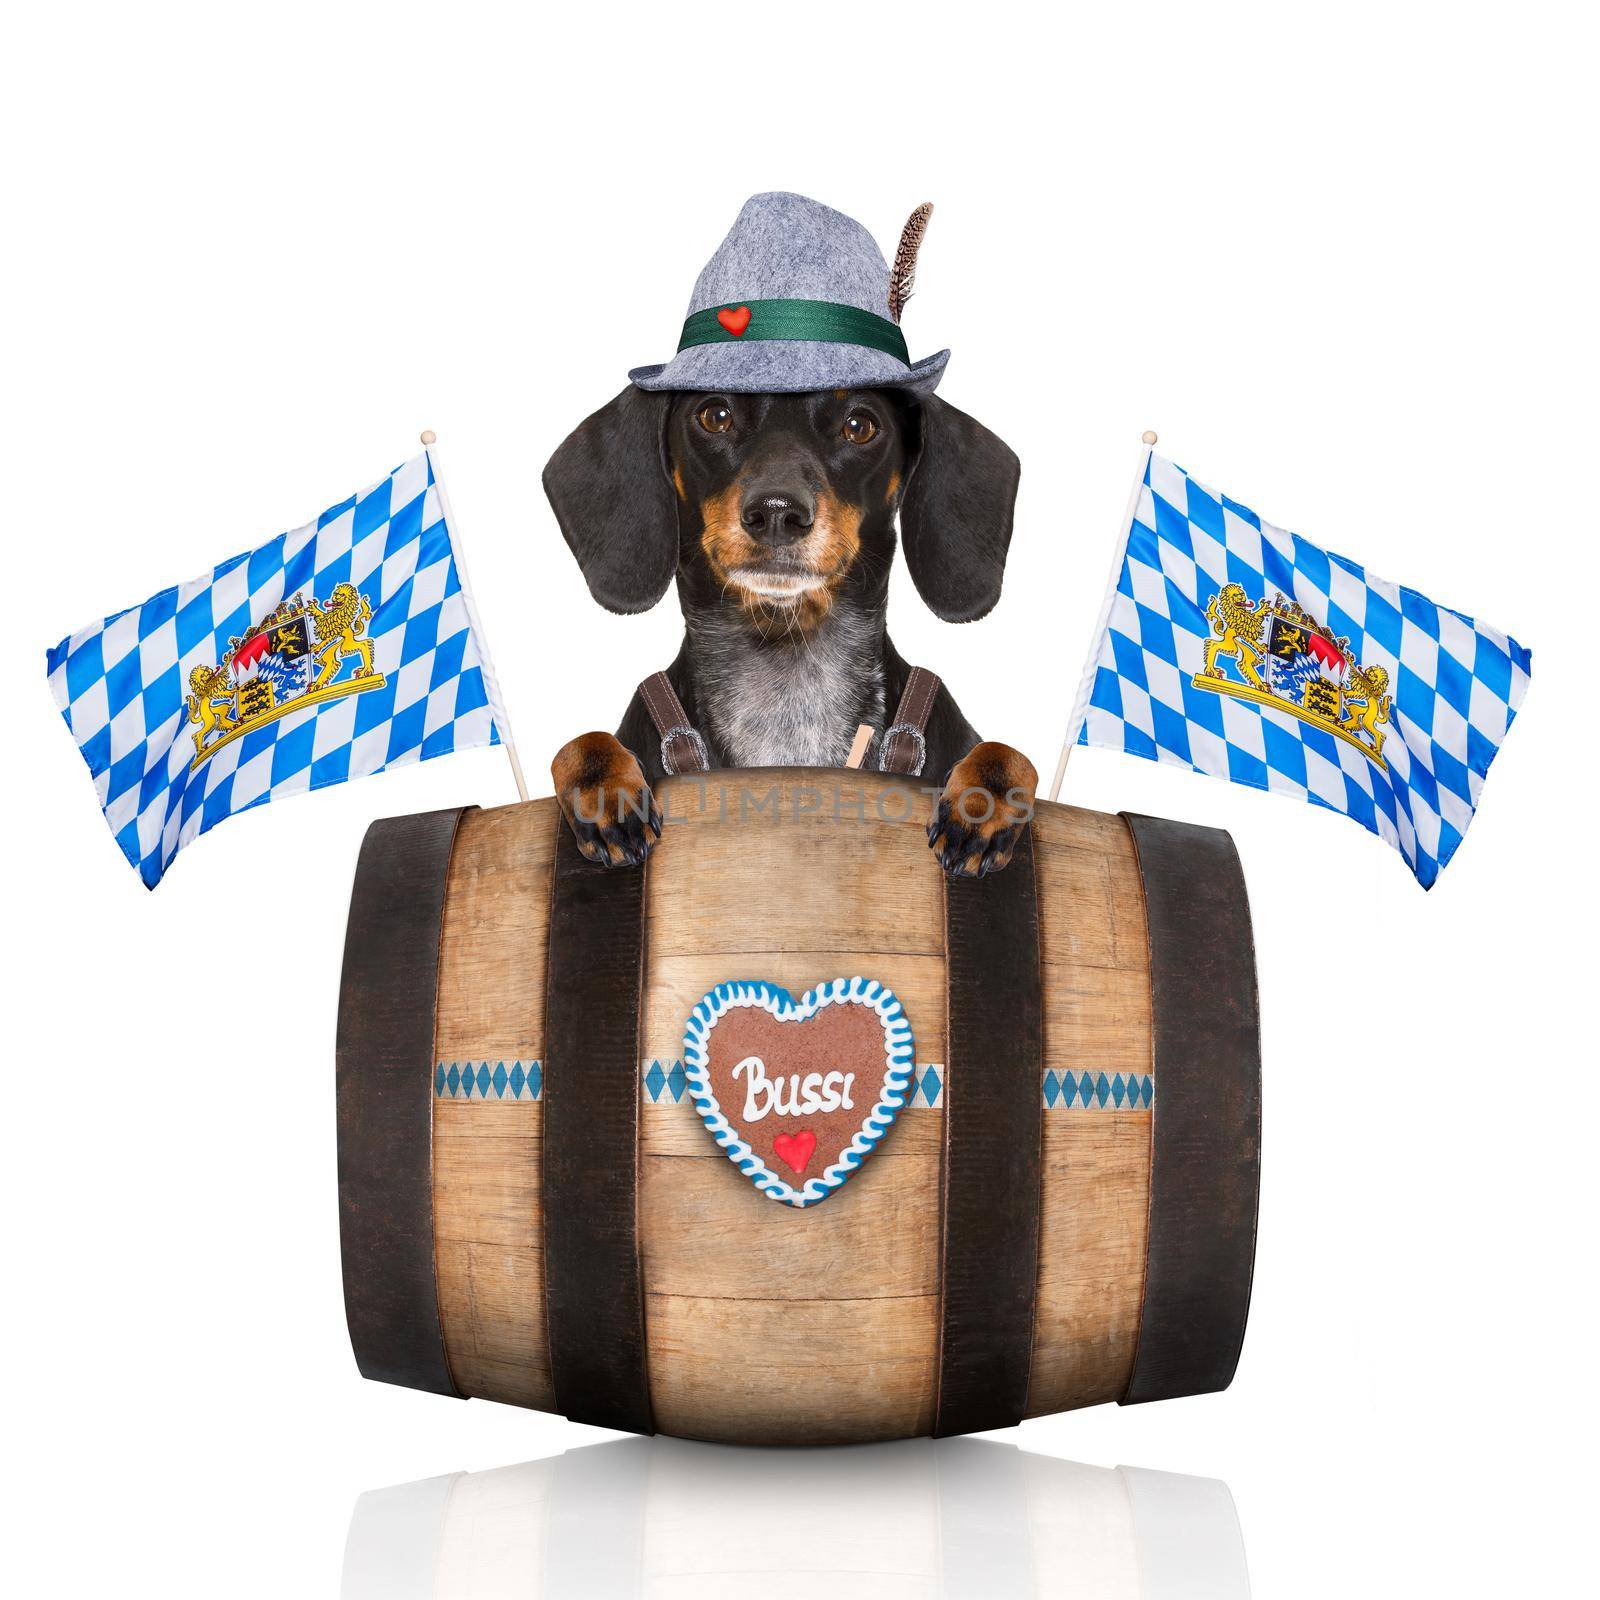 bavarian dachshund or sausage  dog with  gingerbread and  barrel   isolated on white background , ready for the beer celebration festival in munich,